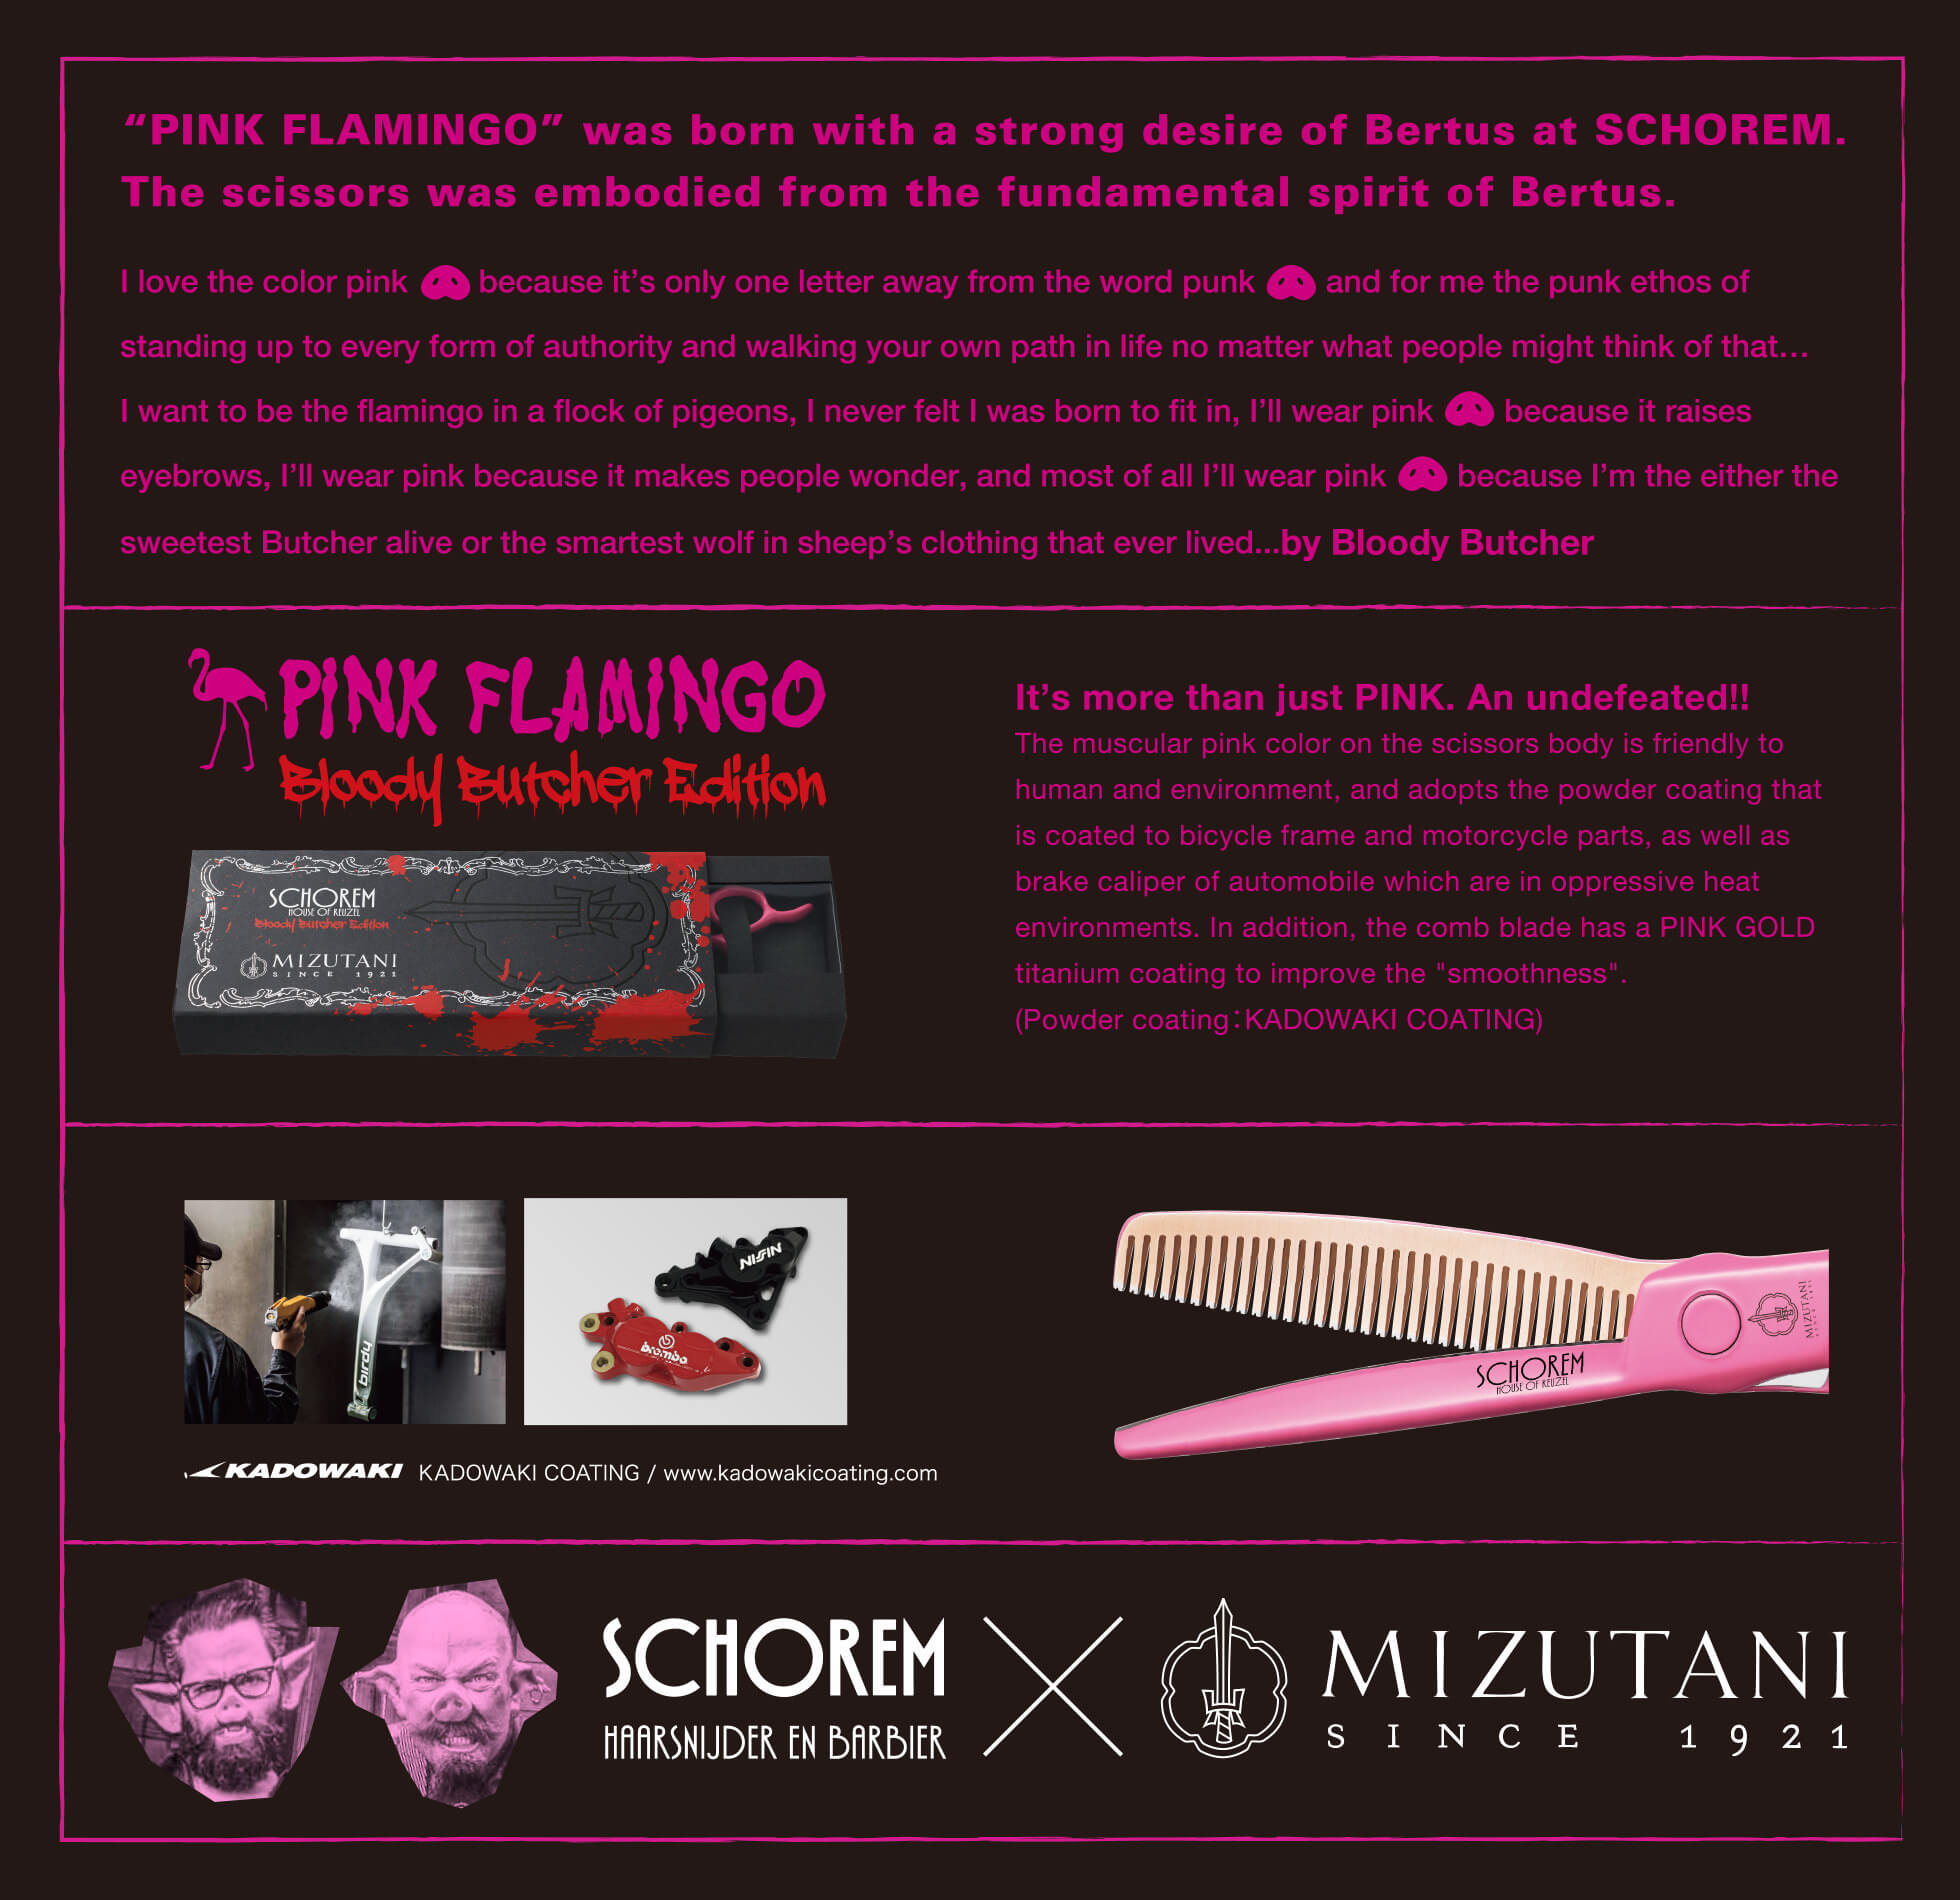 PINK FLAMINGO was born with a strong desire of Bertus at SCHOREM. The scissors was embodied from the fundamental spirit of Bertus.